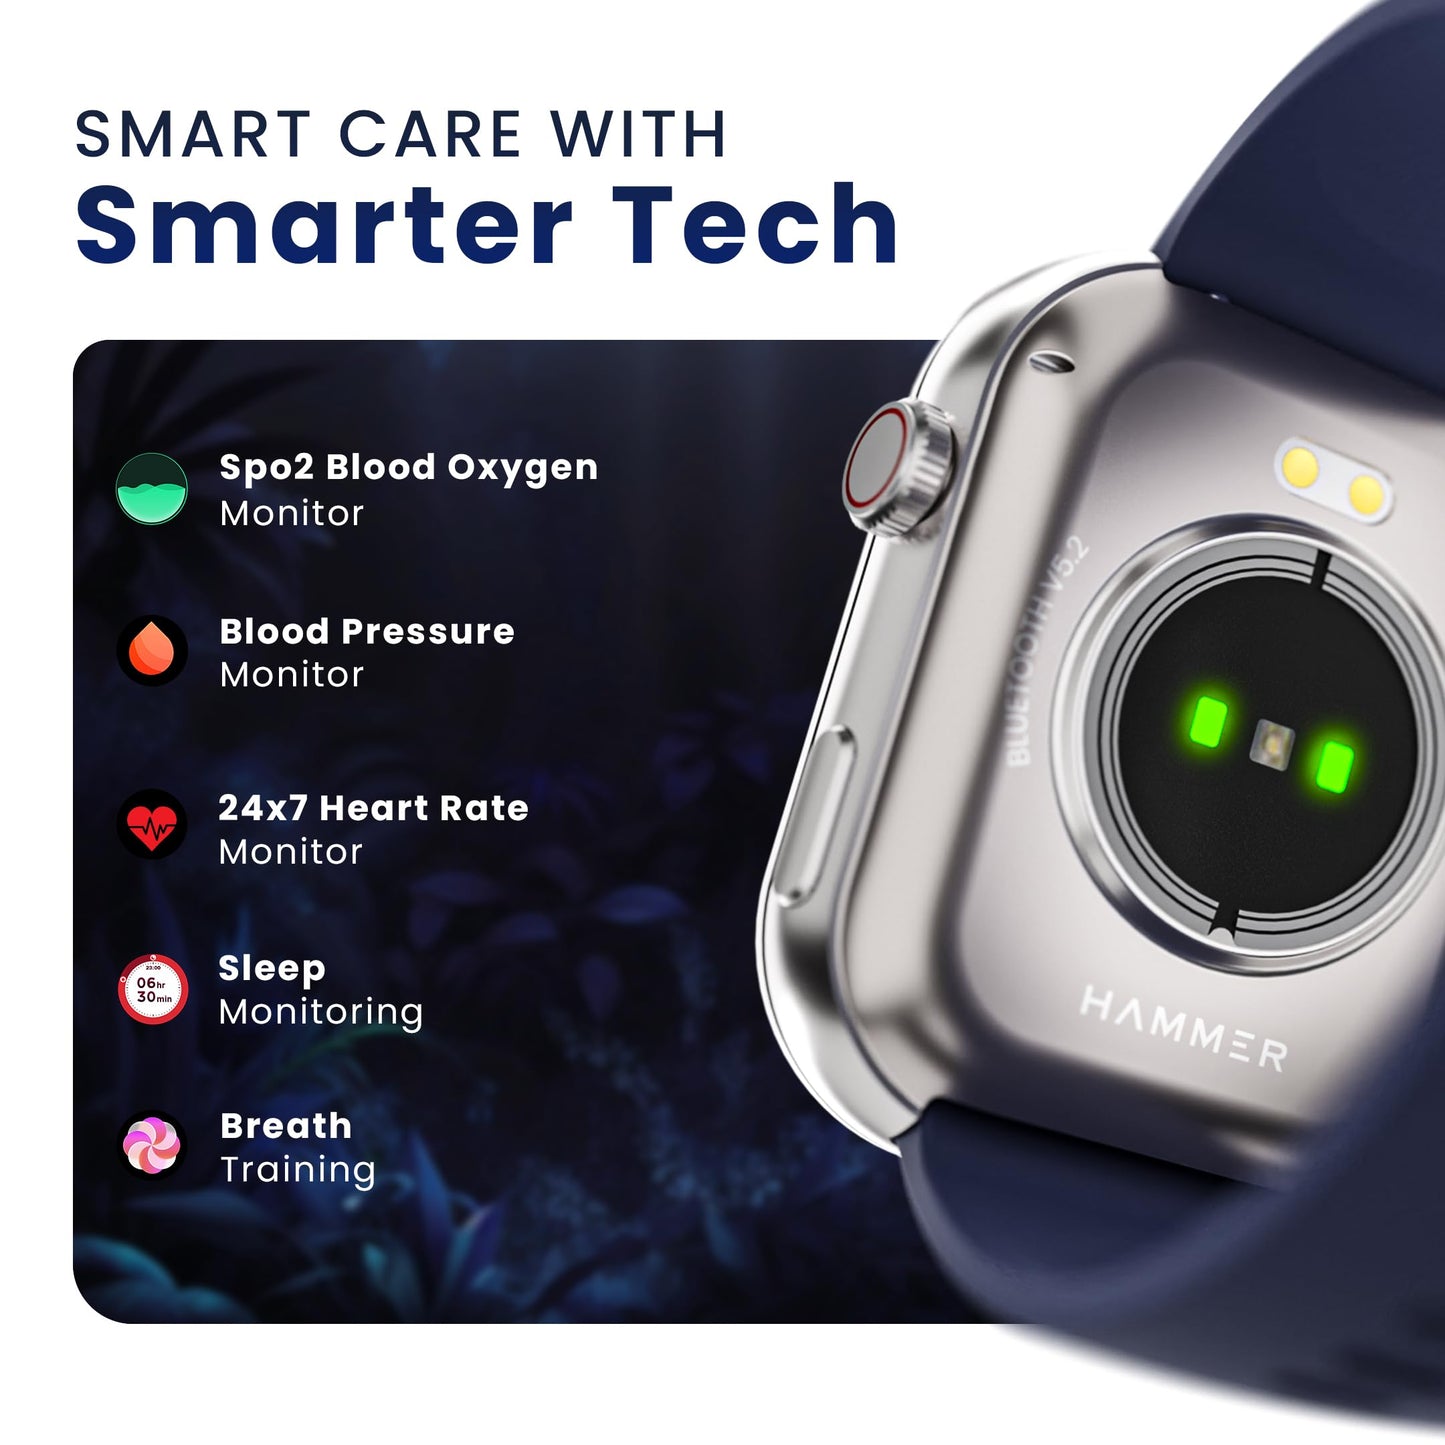 Hammer Tussle 2.01" HD Display Smart Watch, Bluetooth Calling, Rotating Crown, Voice Assistant, In-Built Games, Smart Notifications, Customized Watchfaces, Sports Mode, DND, Raise to Wake Admiral Blue